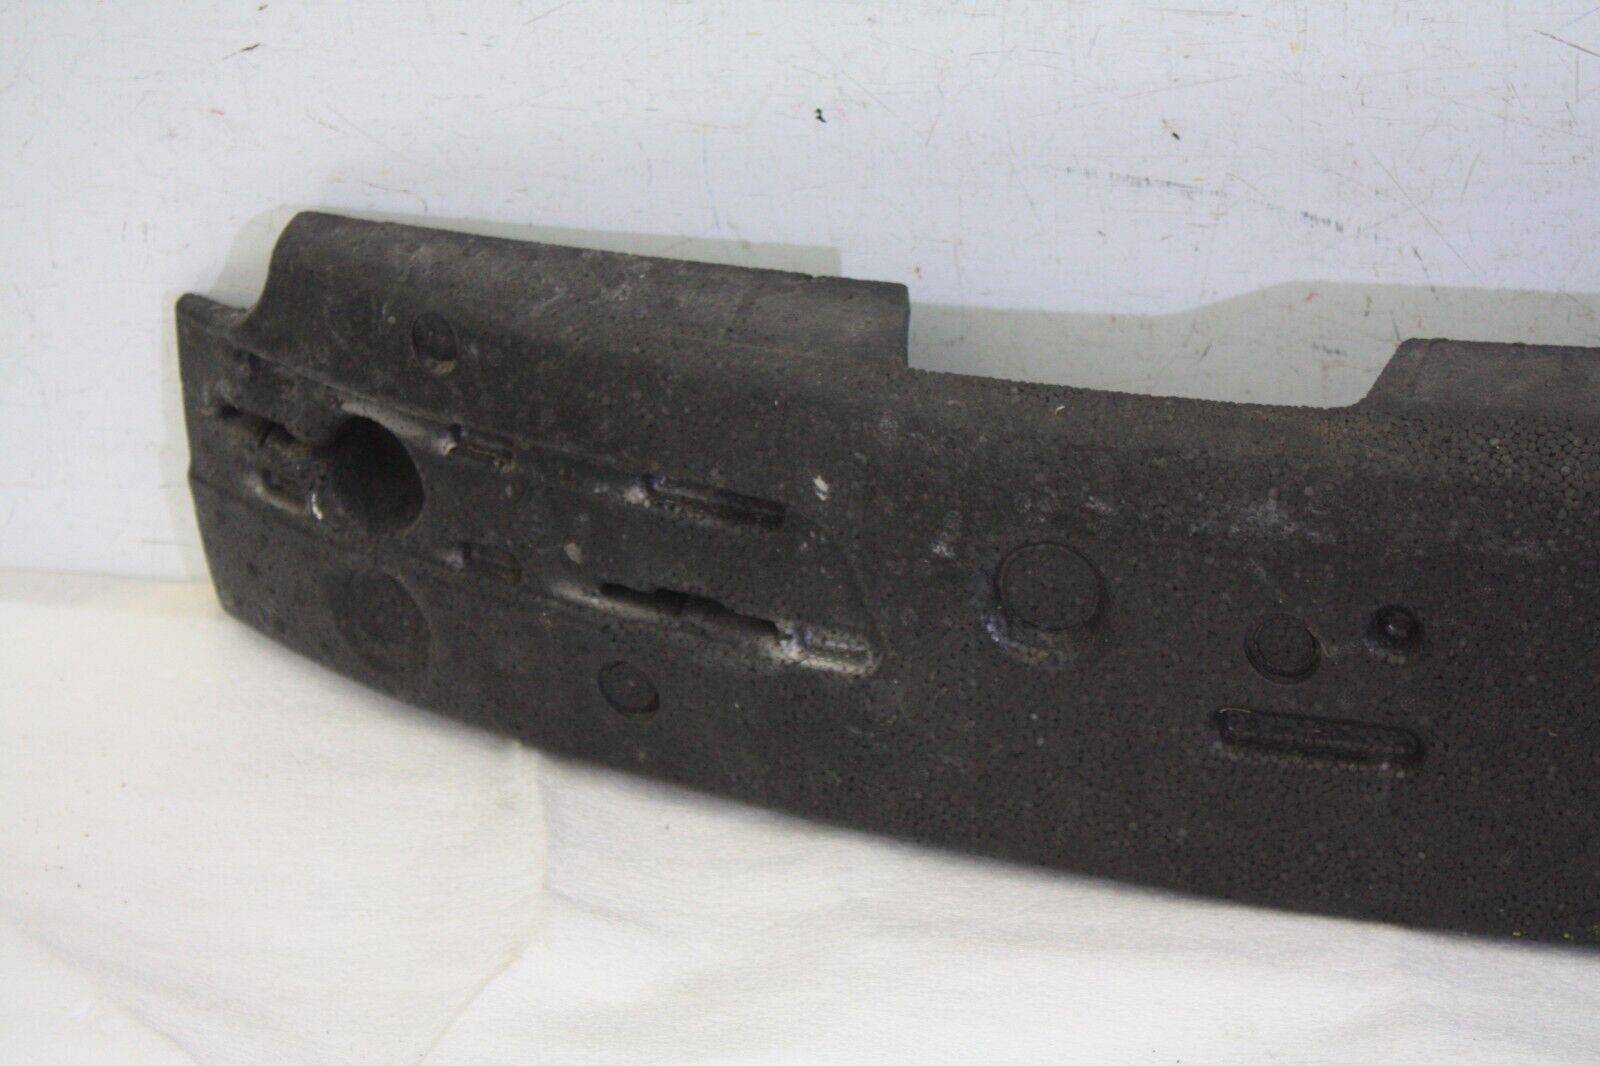 Saab-93-Front-Bumper-Impact-Absorber-Foam-2003-TO-2007-12787219-Genuine-176186054767-4